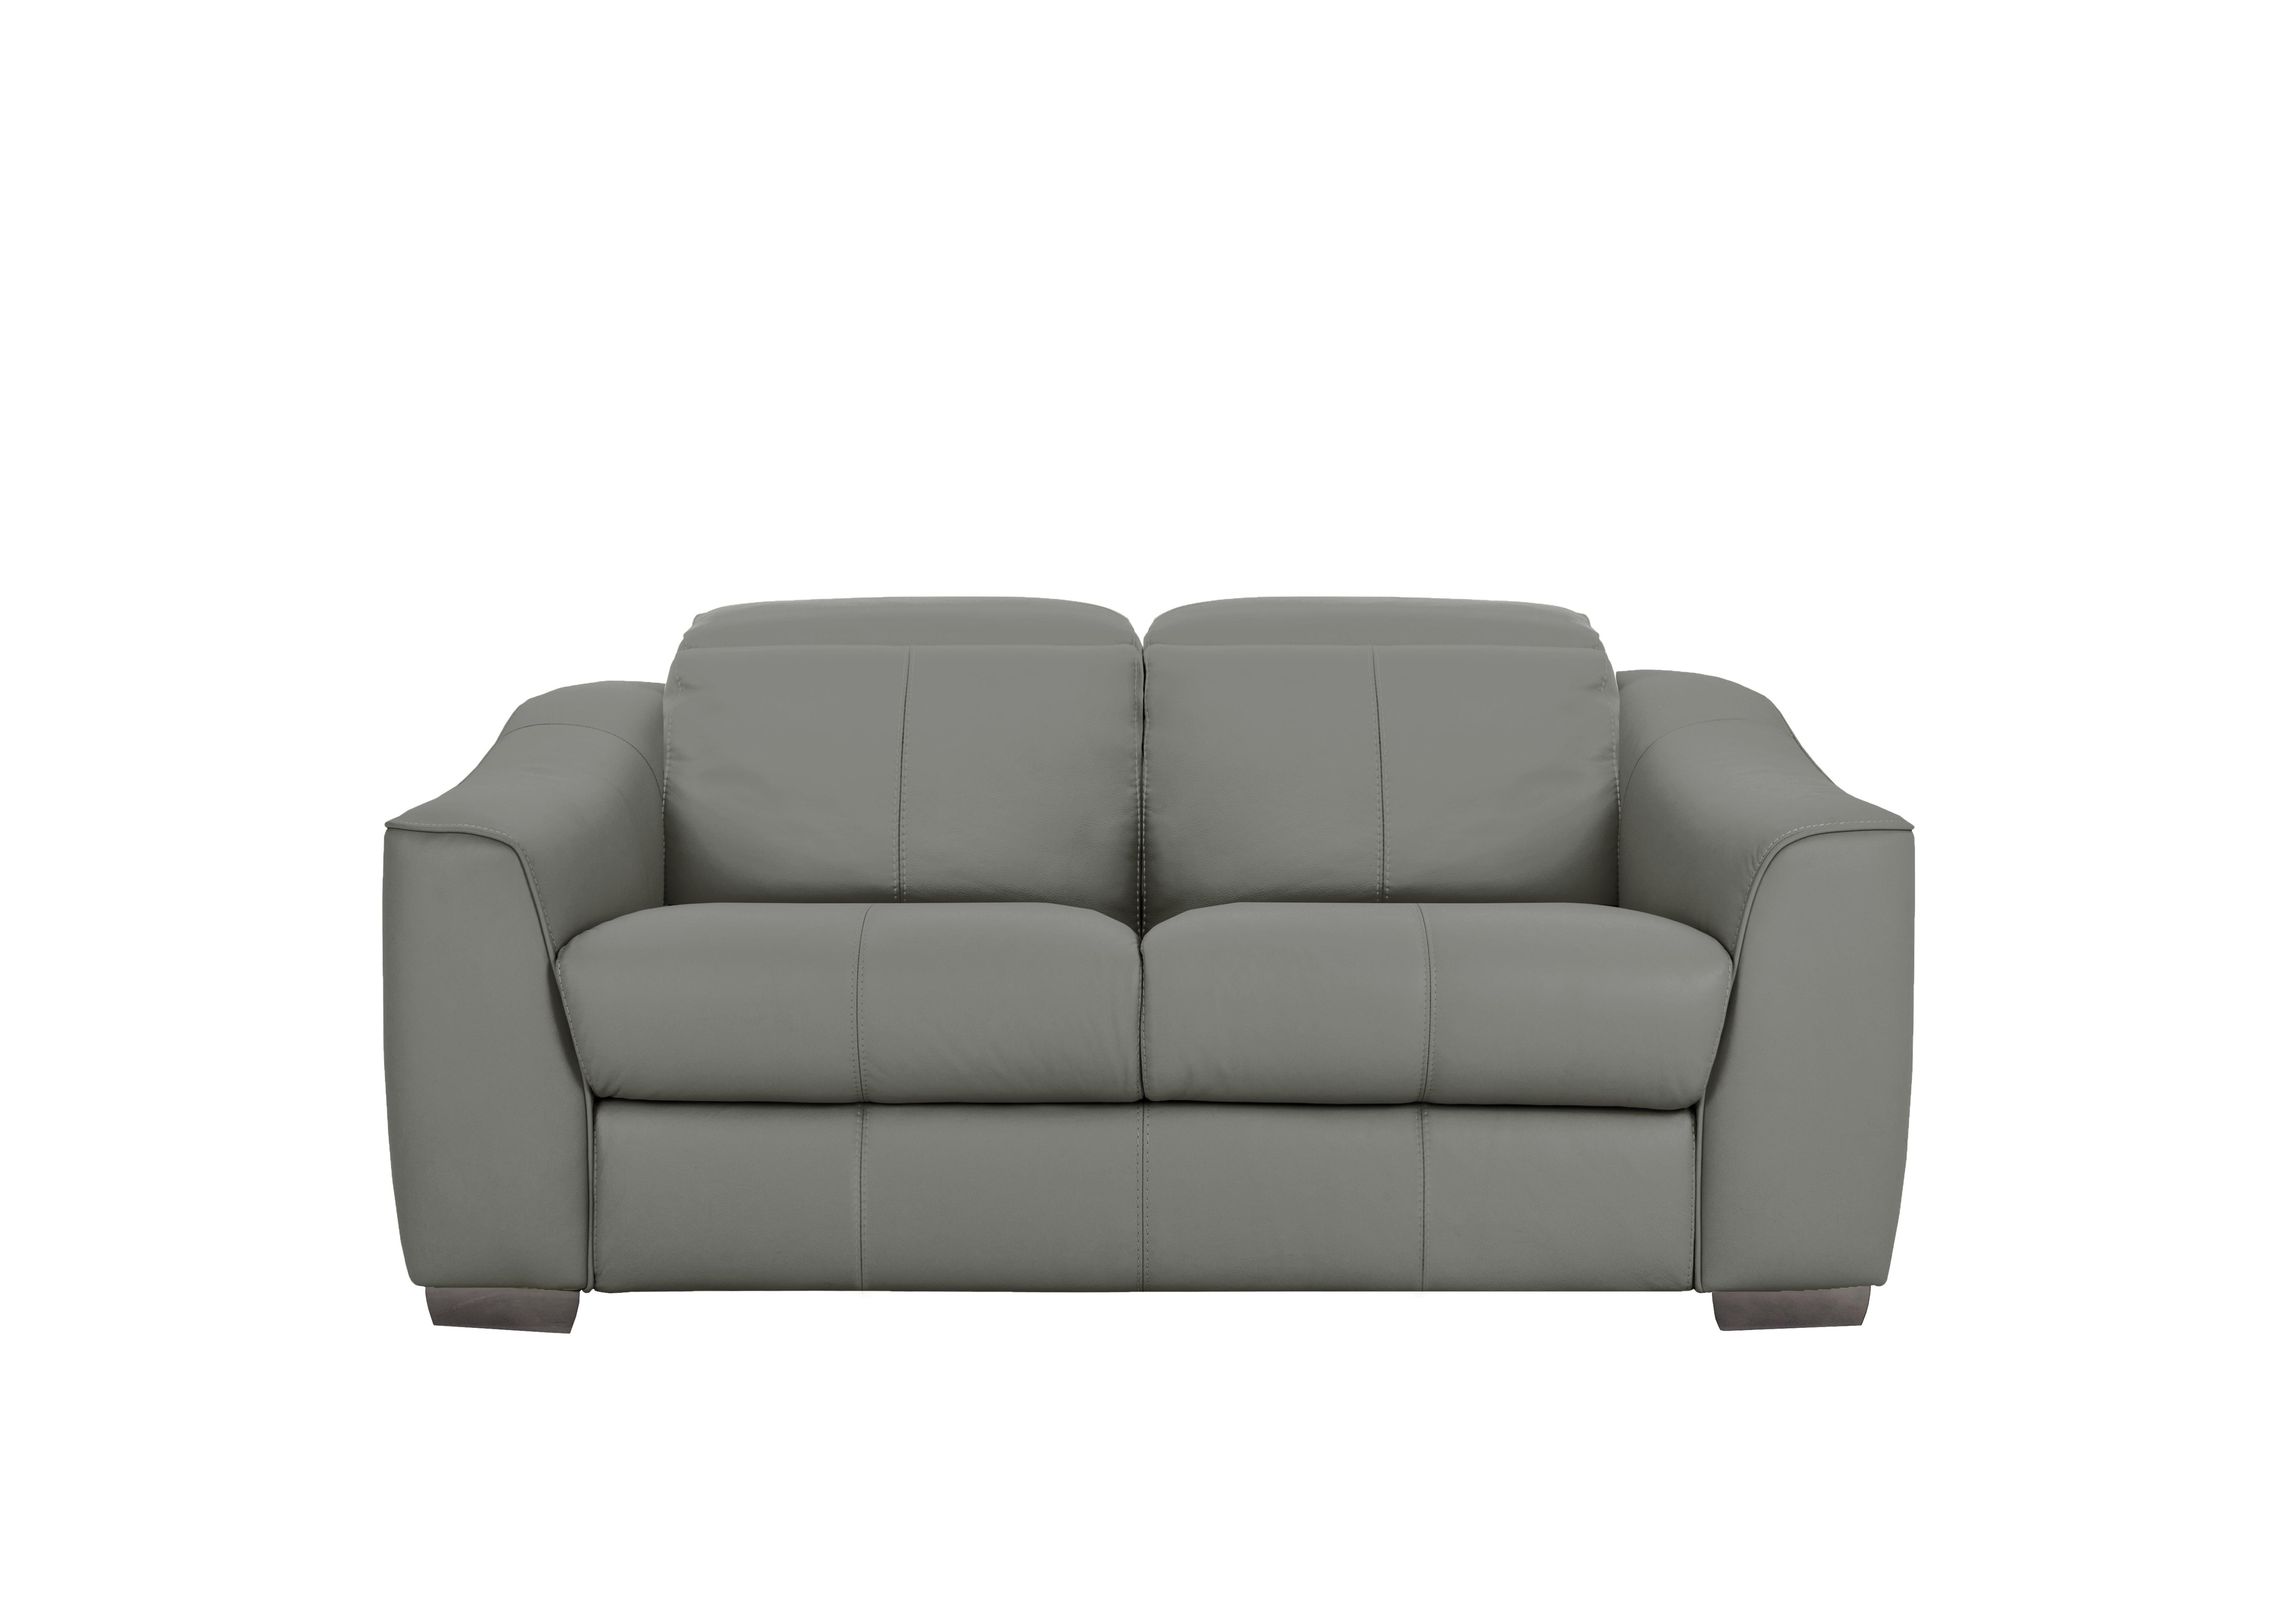 Xavier 2 Seater Leather Sofa in Nc-088e Charcoal Grey on Furniture Village